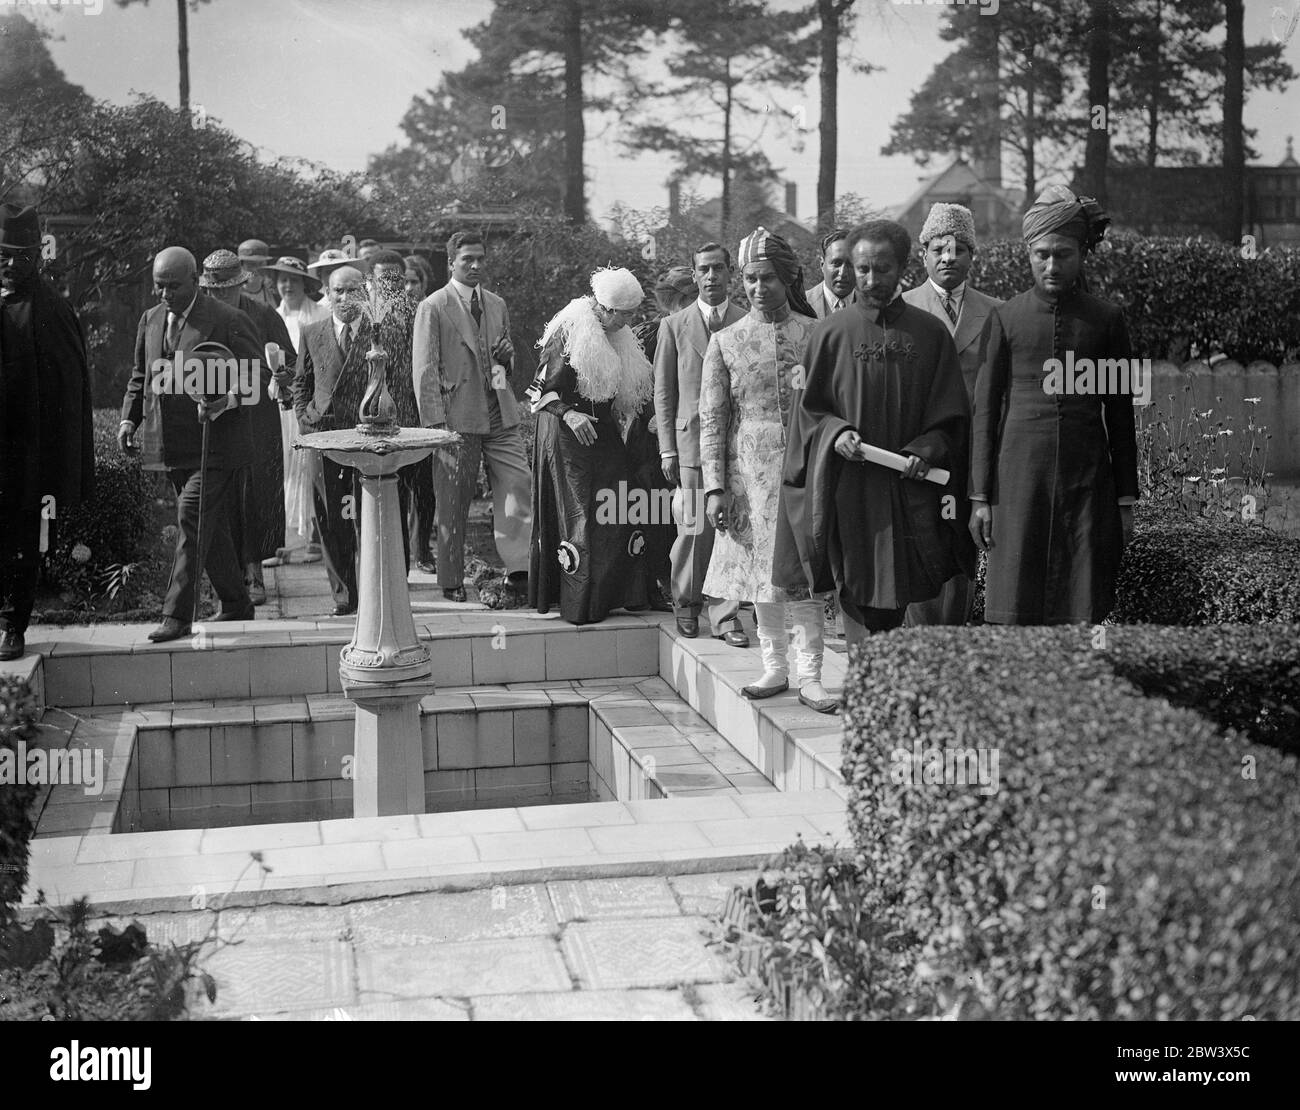 Emperor Haile Selassie At Woking Mosque . Emperor Haile Selassie of Ethiopia and members of his family and suite visited the Woking Mosque ( Surrey ) from Bath . The Moslem community gave an address of welcome , and Indian potentates were present . Photo shows : Emperor Haile Selassie at the Mosque . 25 Aug 1936 Original caption from negative The Shah Jahan Mosque was the first purpose built mosque in Europe outside of Muslim Spain Stock Photo